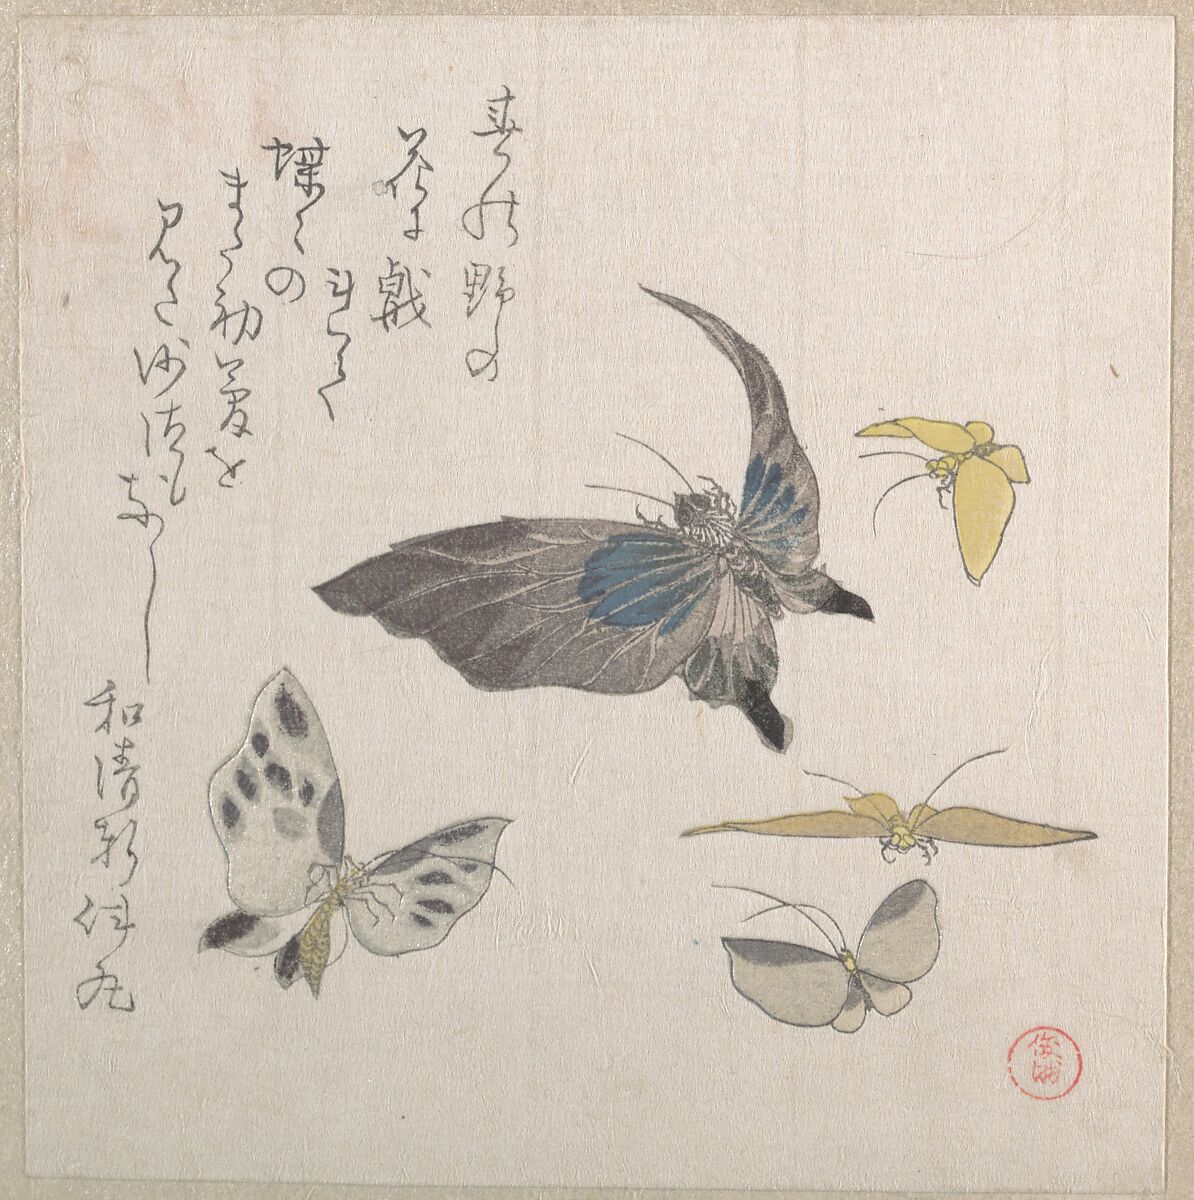 Butterflies, Kubo Shunman (Japanese, 1757–1820) (?), Part of an album of woodblock prints (surimono); ink and color on paper, Japan 